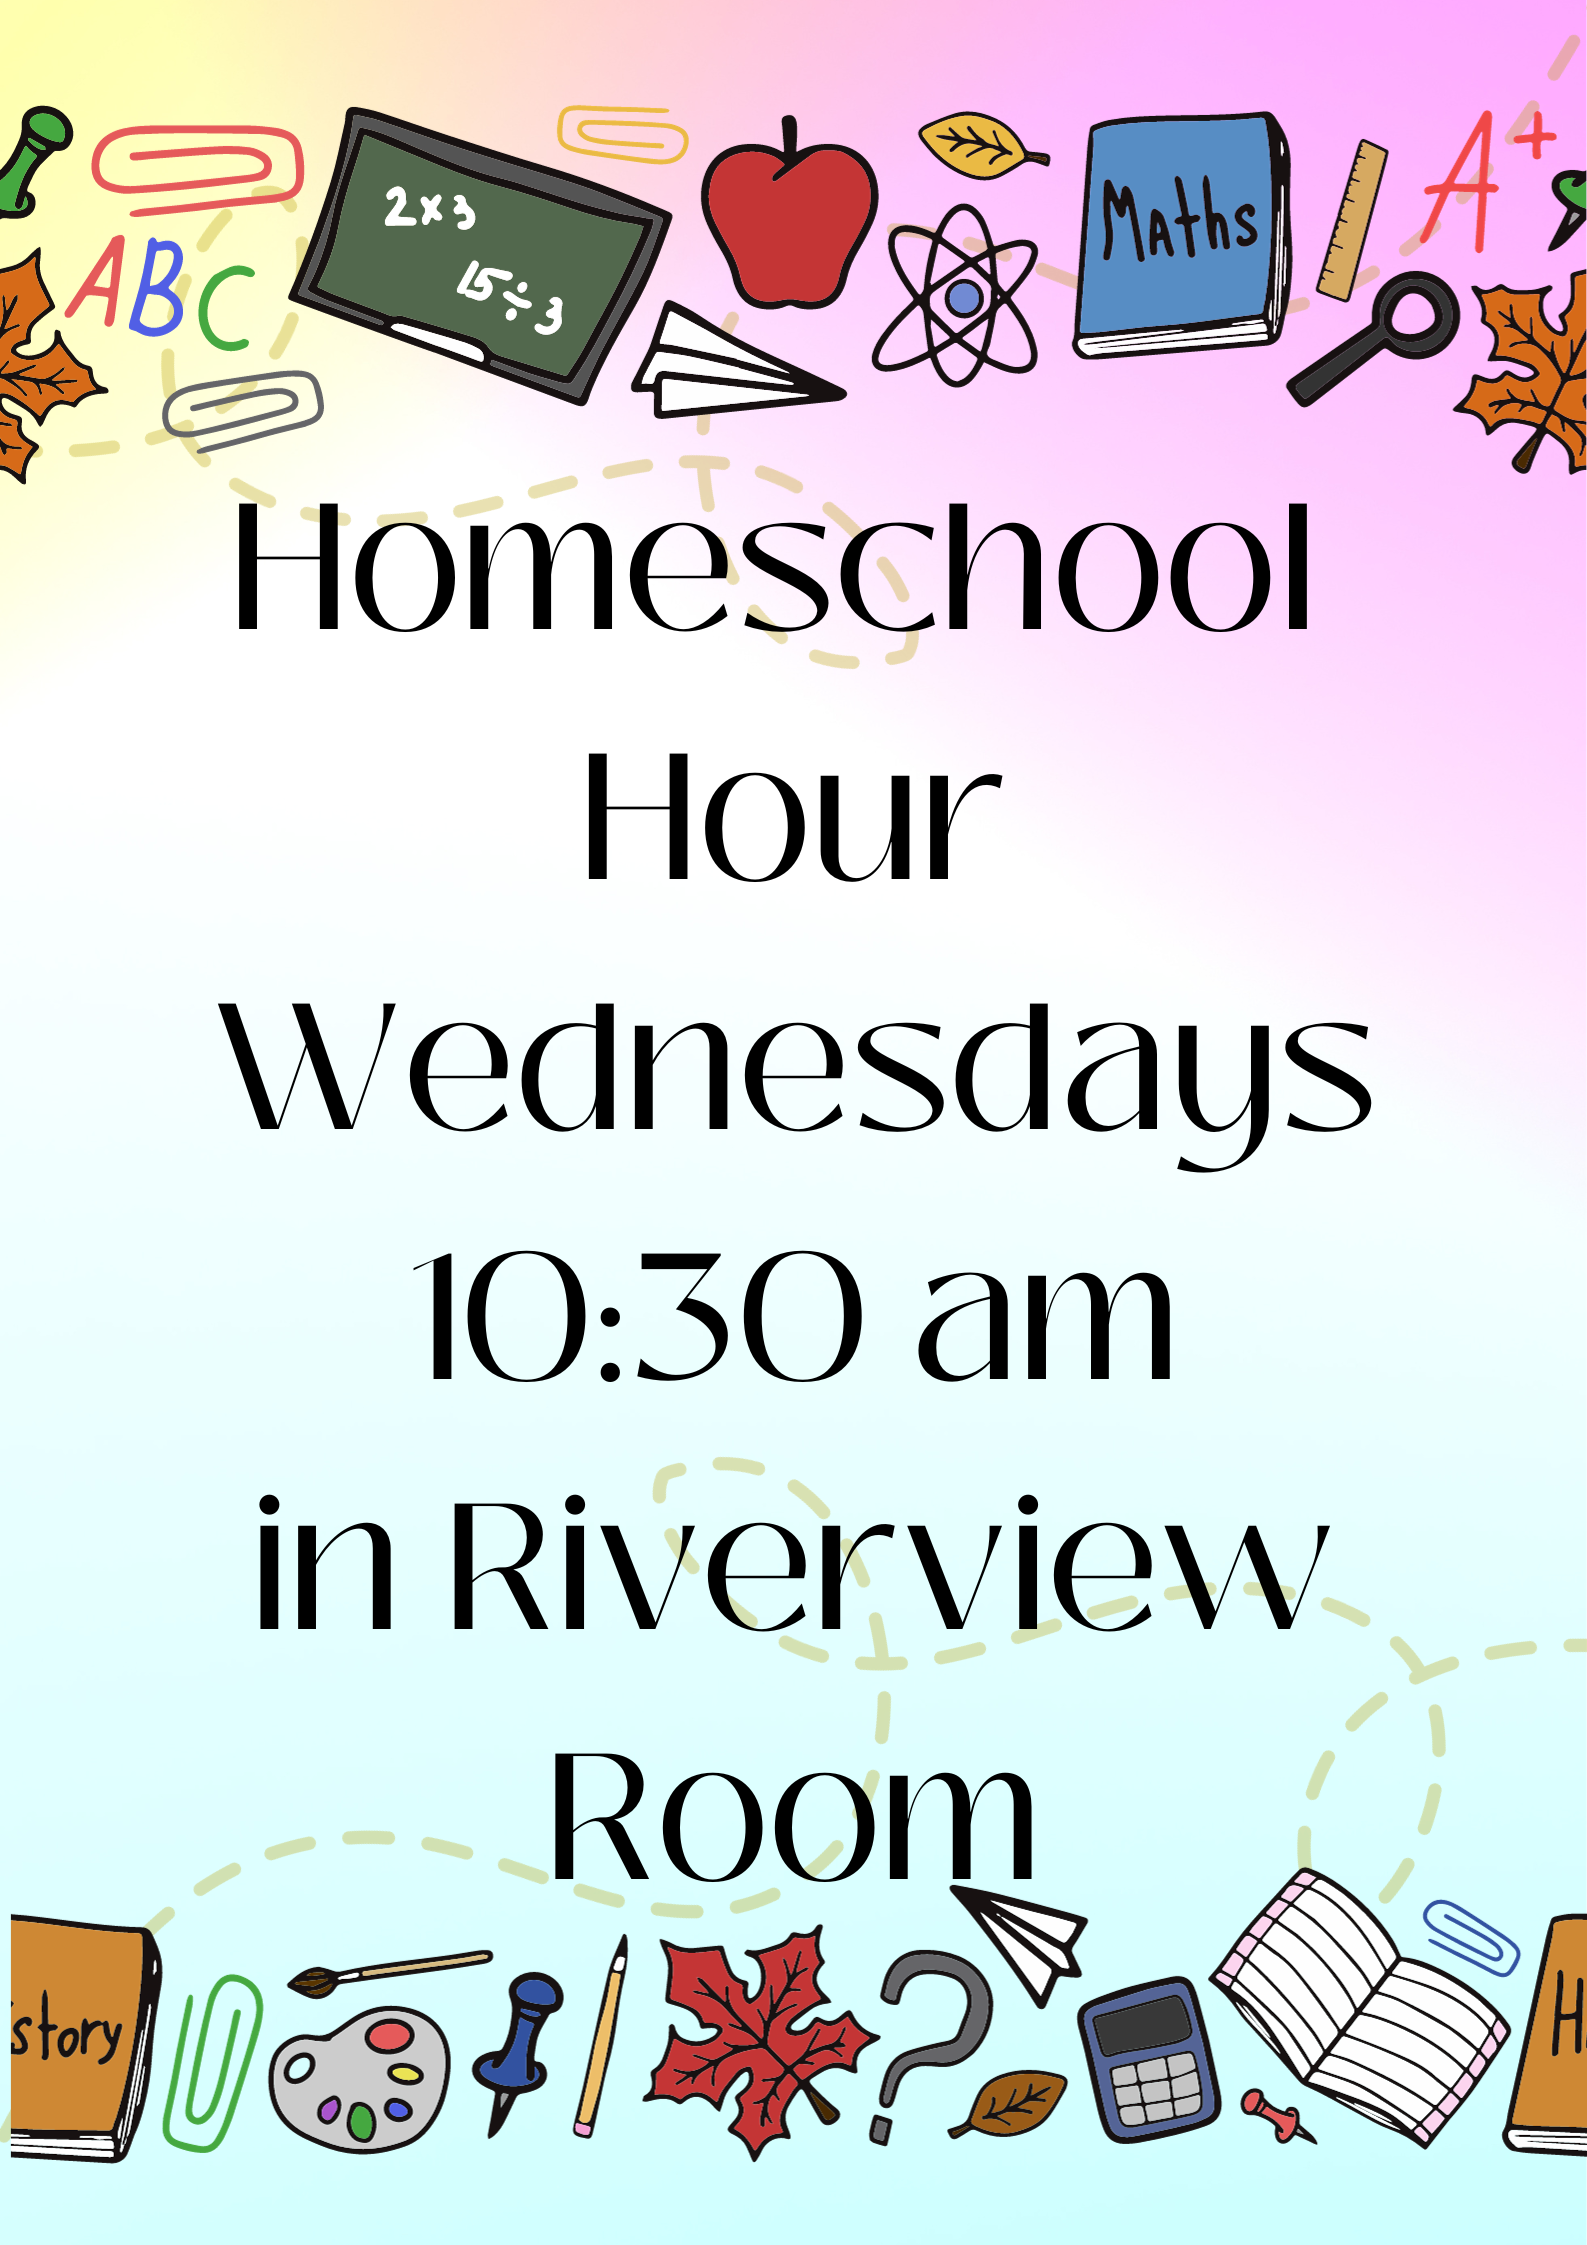 Homeschool Hour *CANCELED FOR THANKSGIVING WEEK*